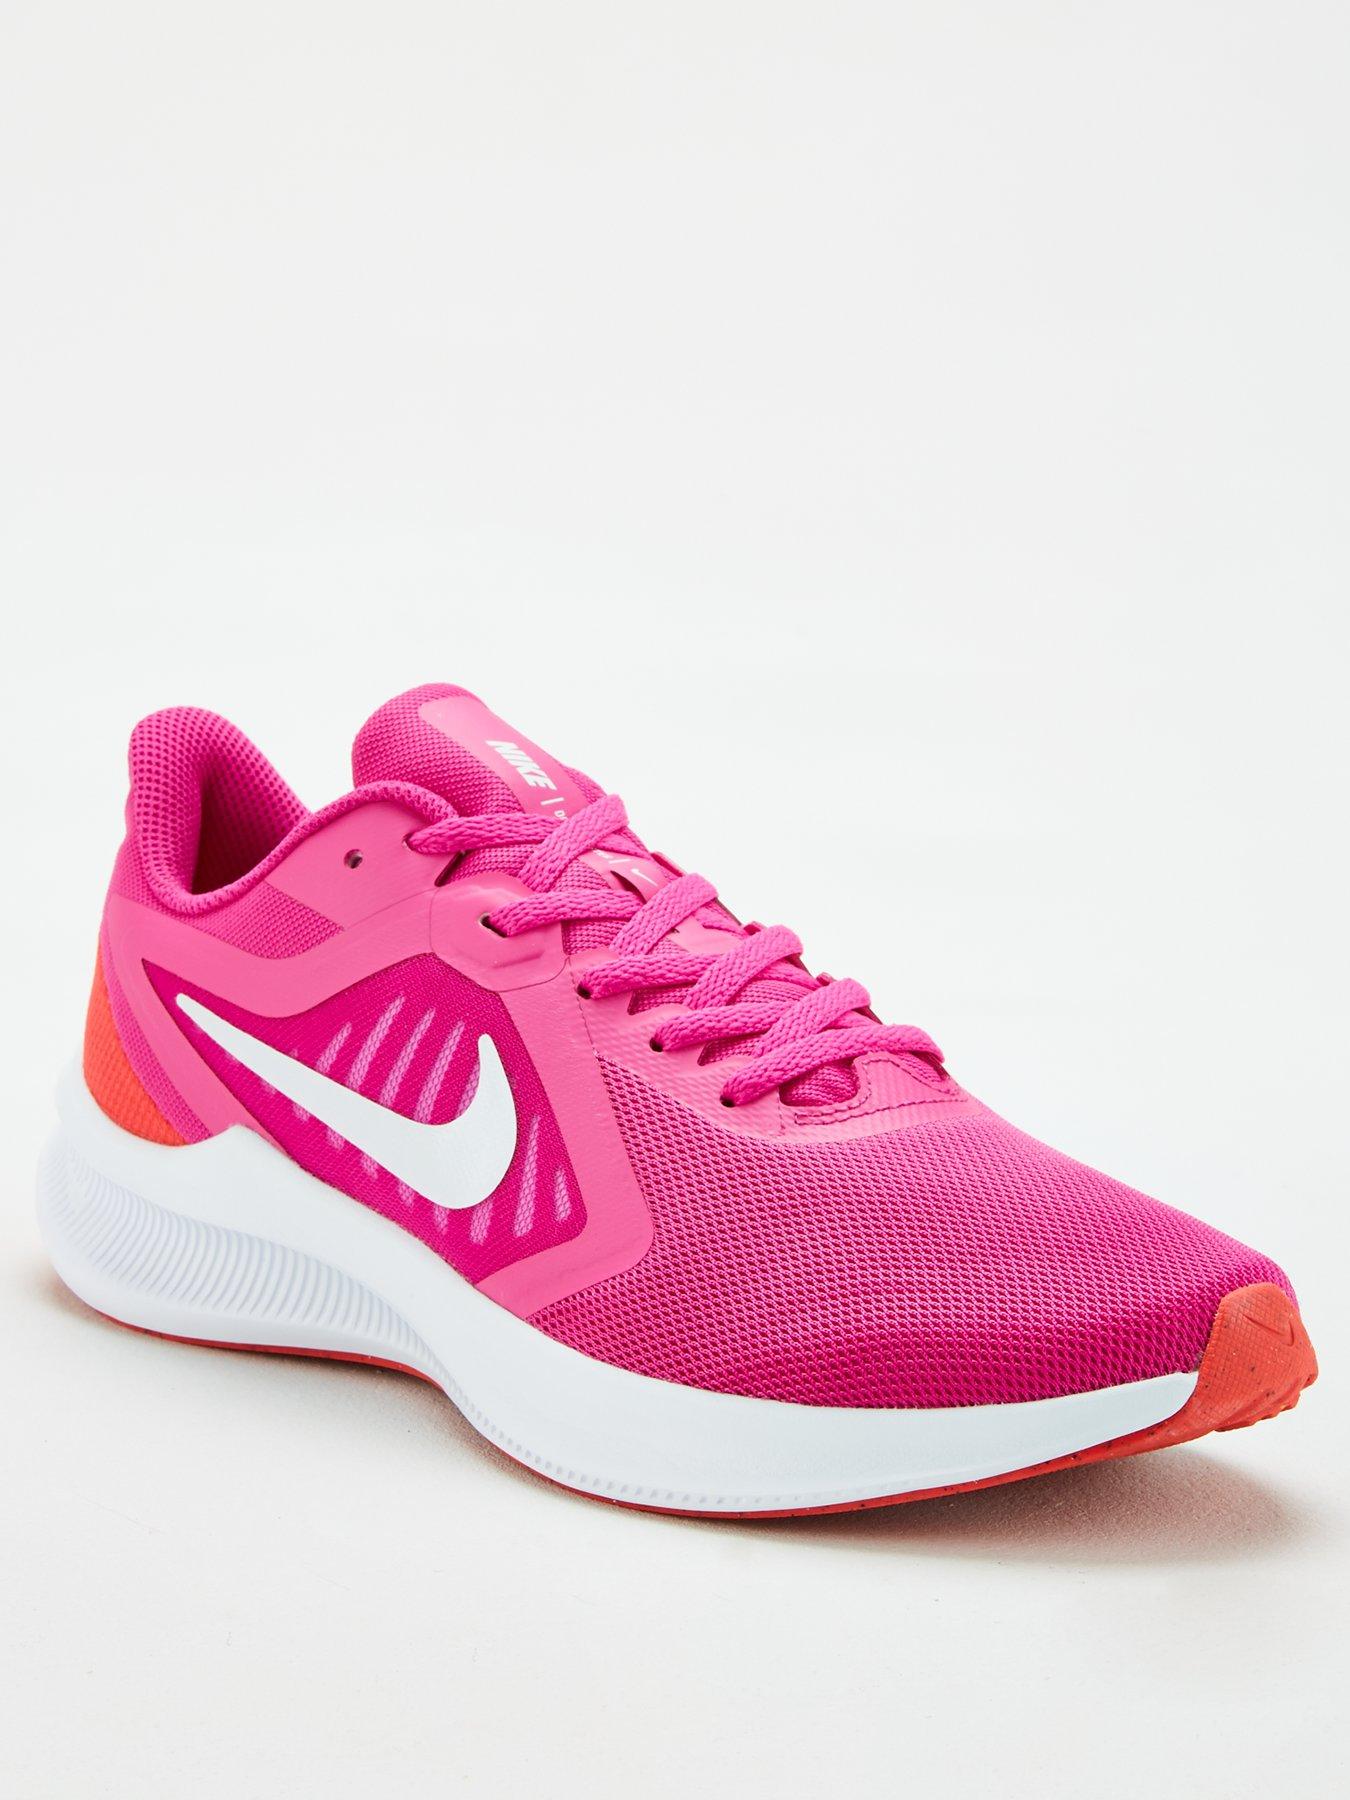 Nike Downshifter 10 - Pink/White | very 